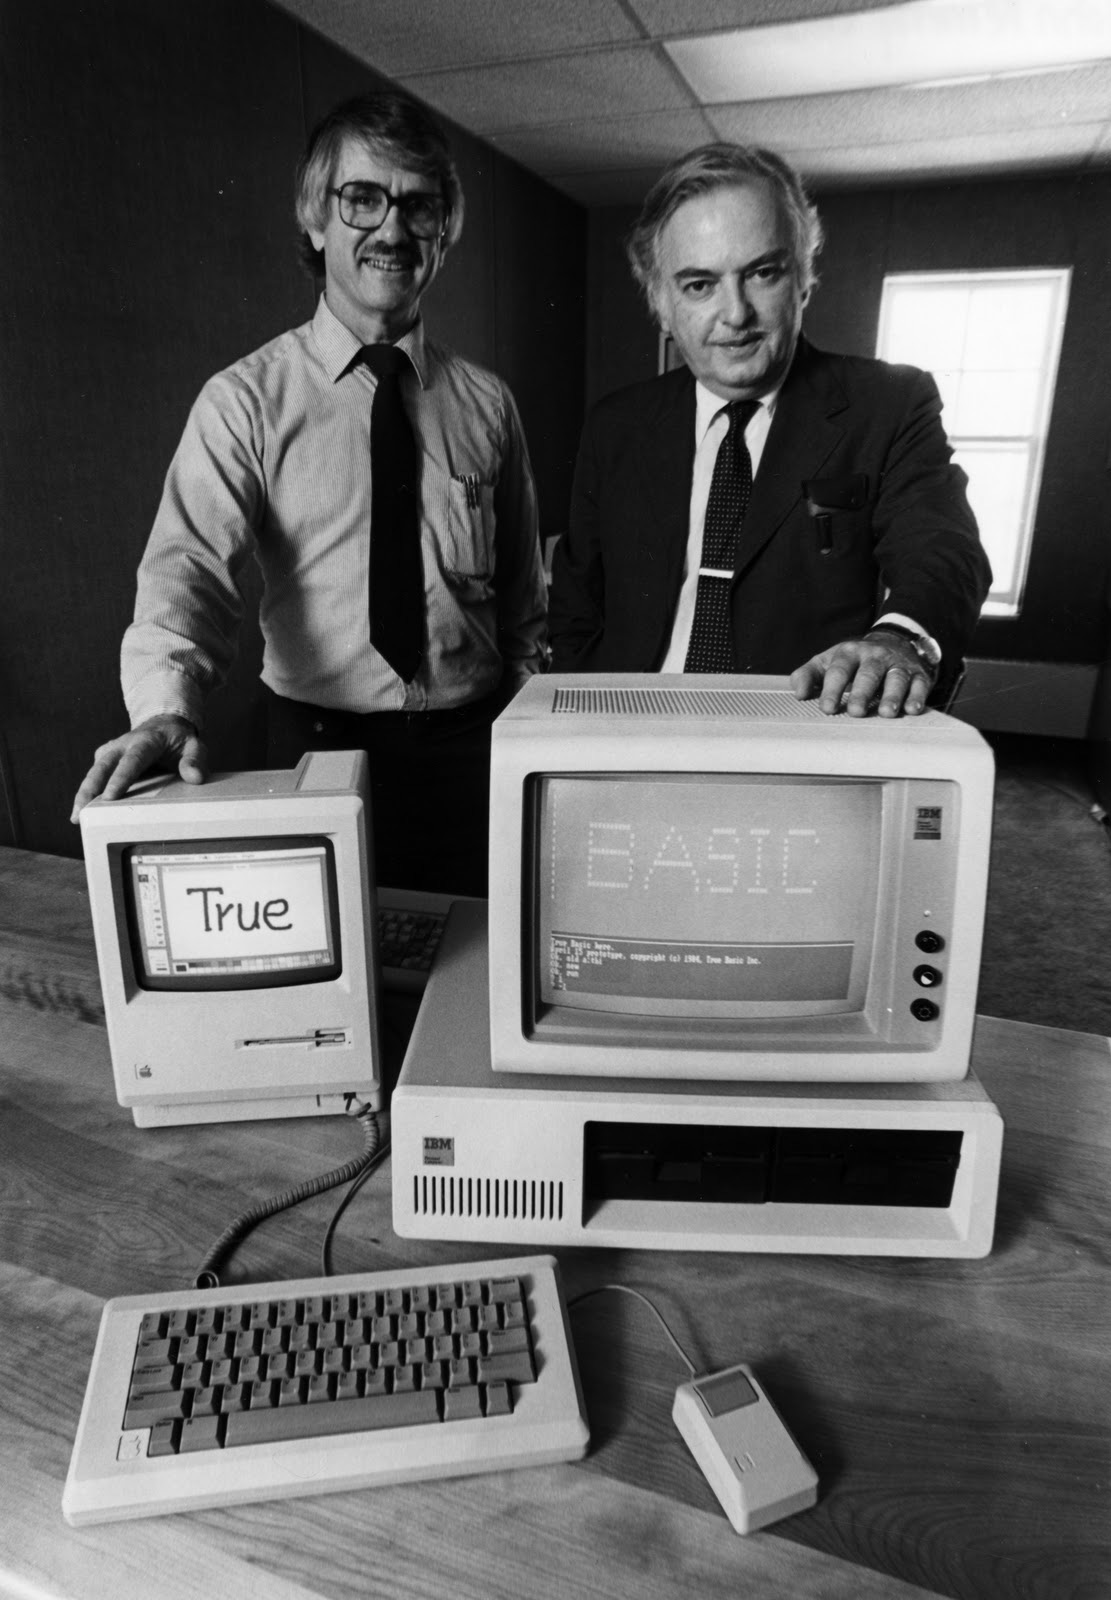 BASIC creators Thomas Kurtz (left) and John Kemeny in the mid-1980s, showing their True BASIC running on a Mac and an IBM PC (Dartmouth College)